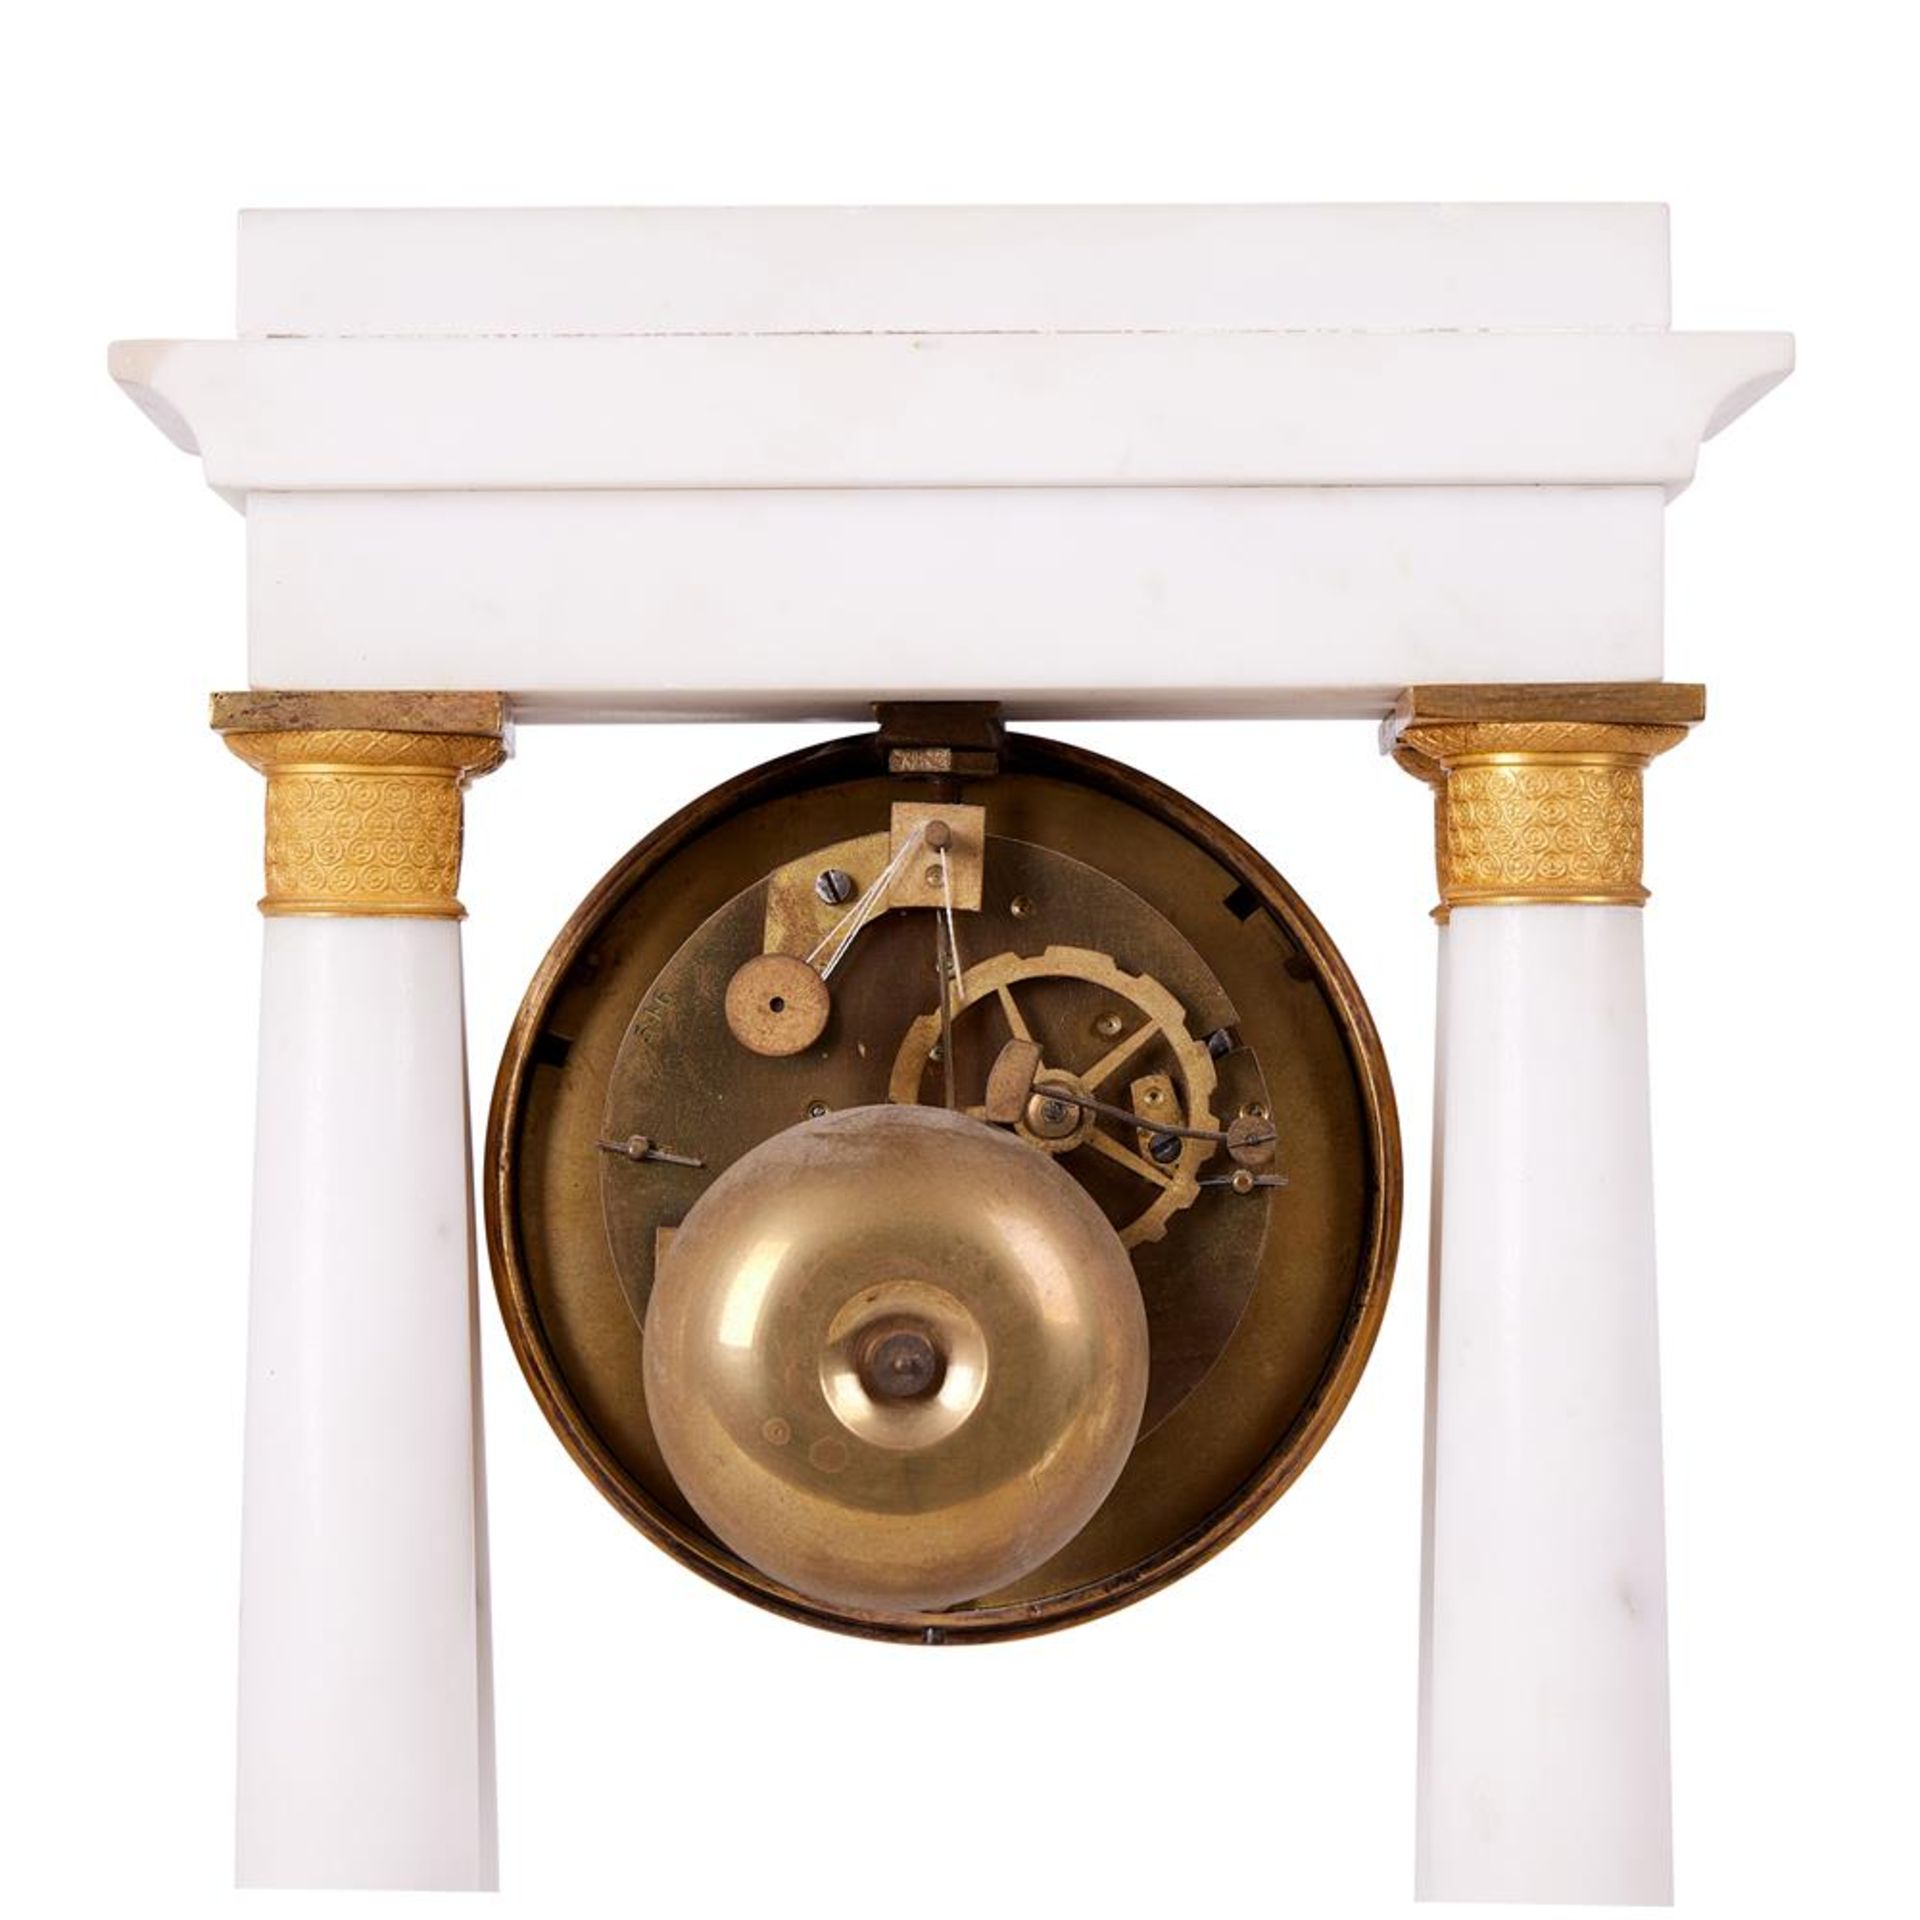 A FRENCH WHITE MARBLE AND GILT METAL MOUNTED PORTICO MANTEL CLOCK, MID 19TH CENTURY - Image 2 of 2